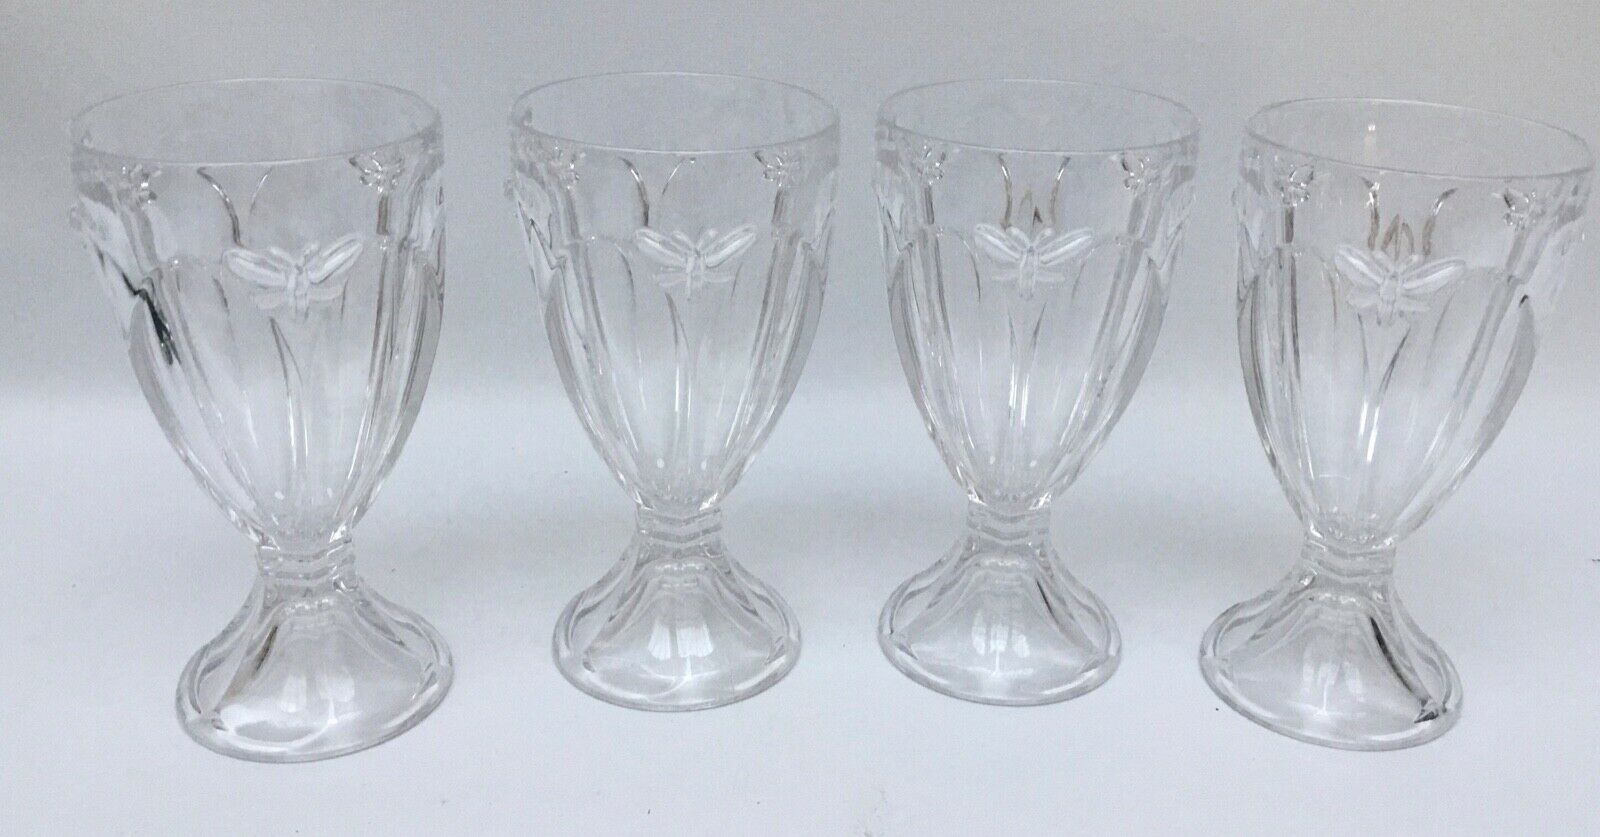 4 (four) Lenox Butterfly Meadow Footed Water/wine Goblet Glasses 6 1/4”